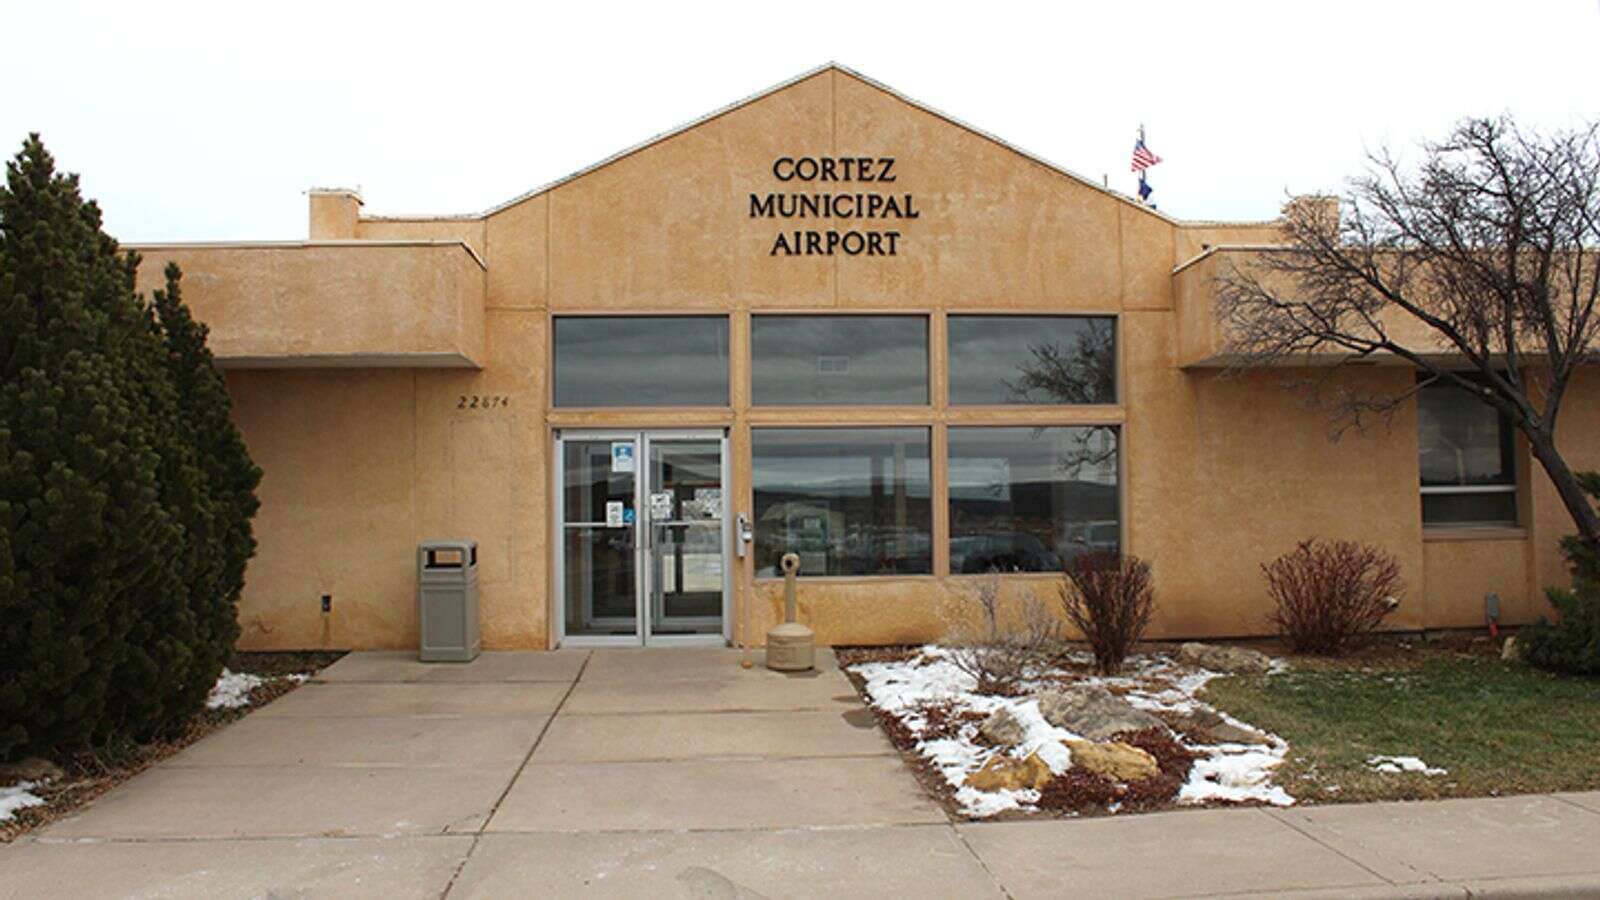 Cortez Municipal Airport slowly recovering from pandemic downturn 